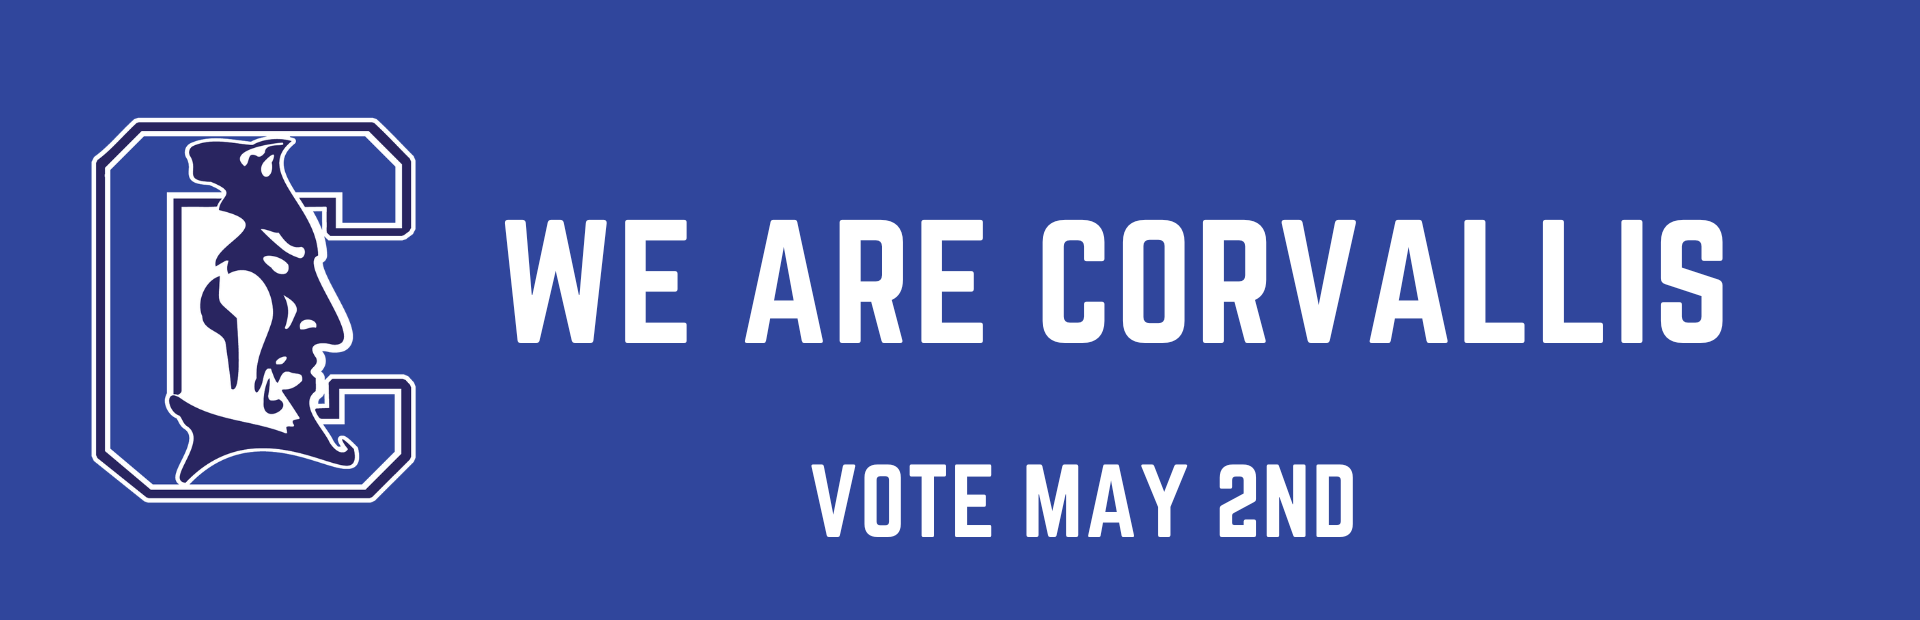 we are corvallis vote may 2nd